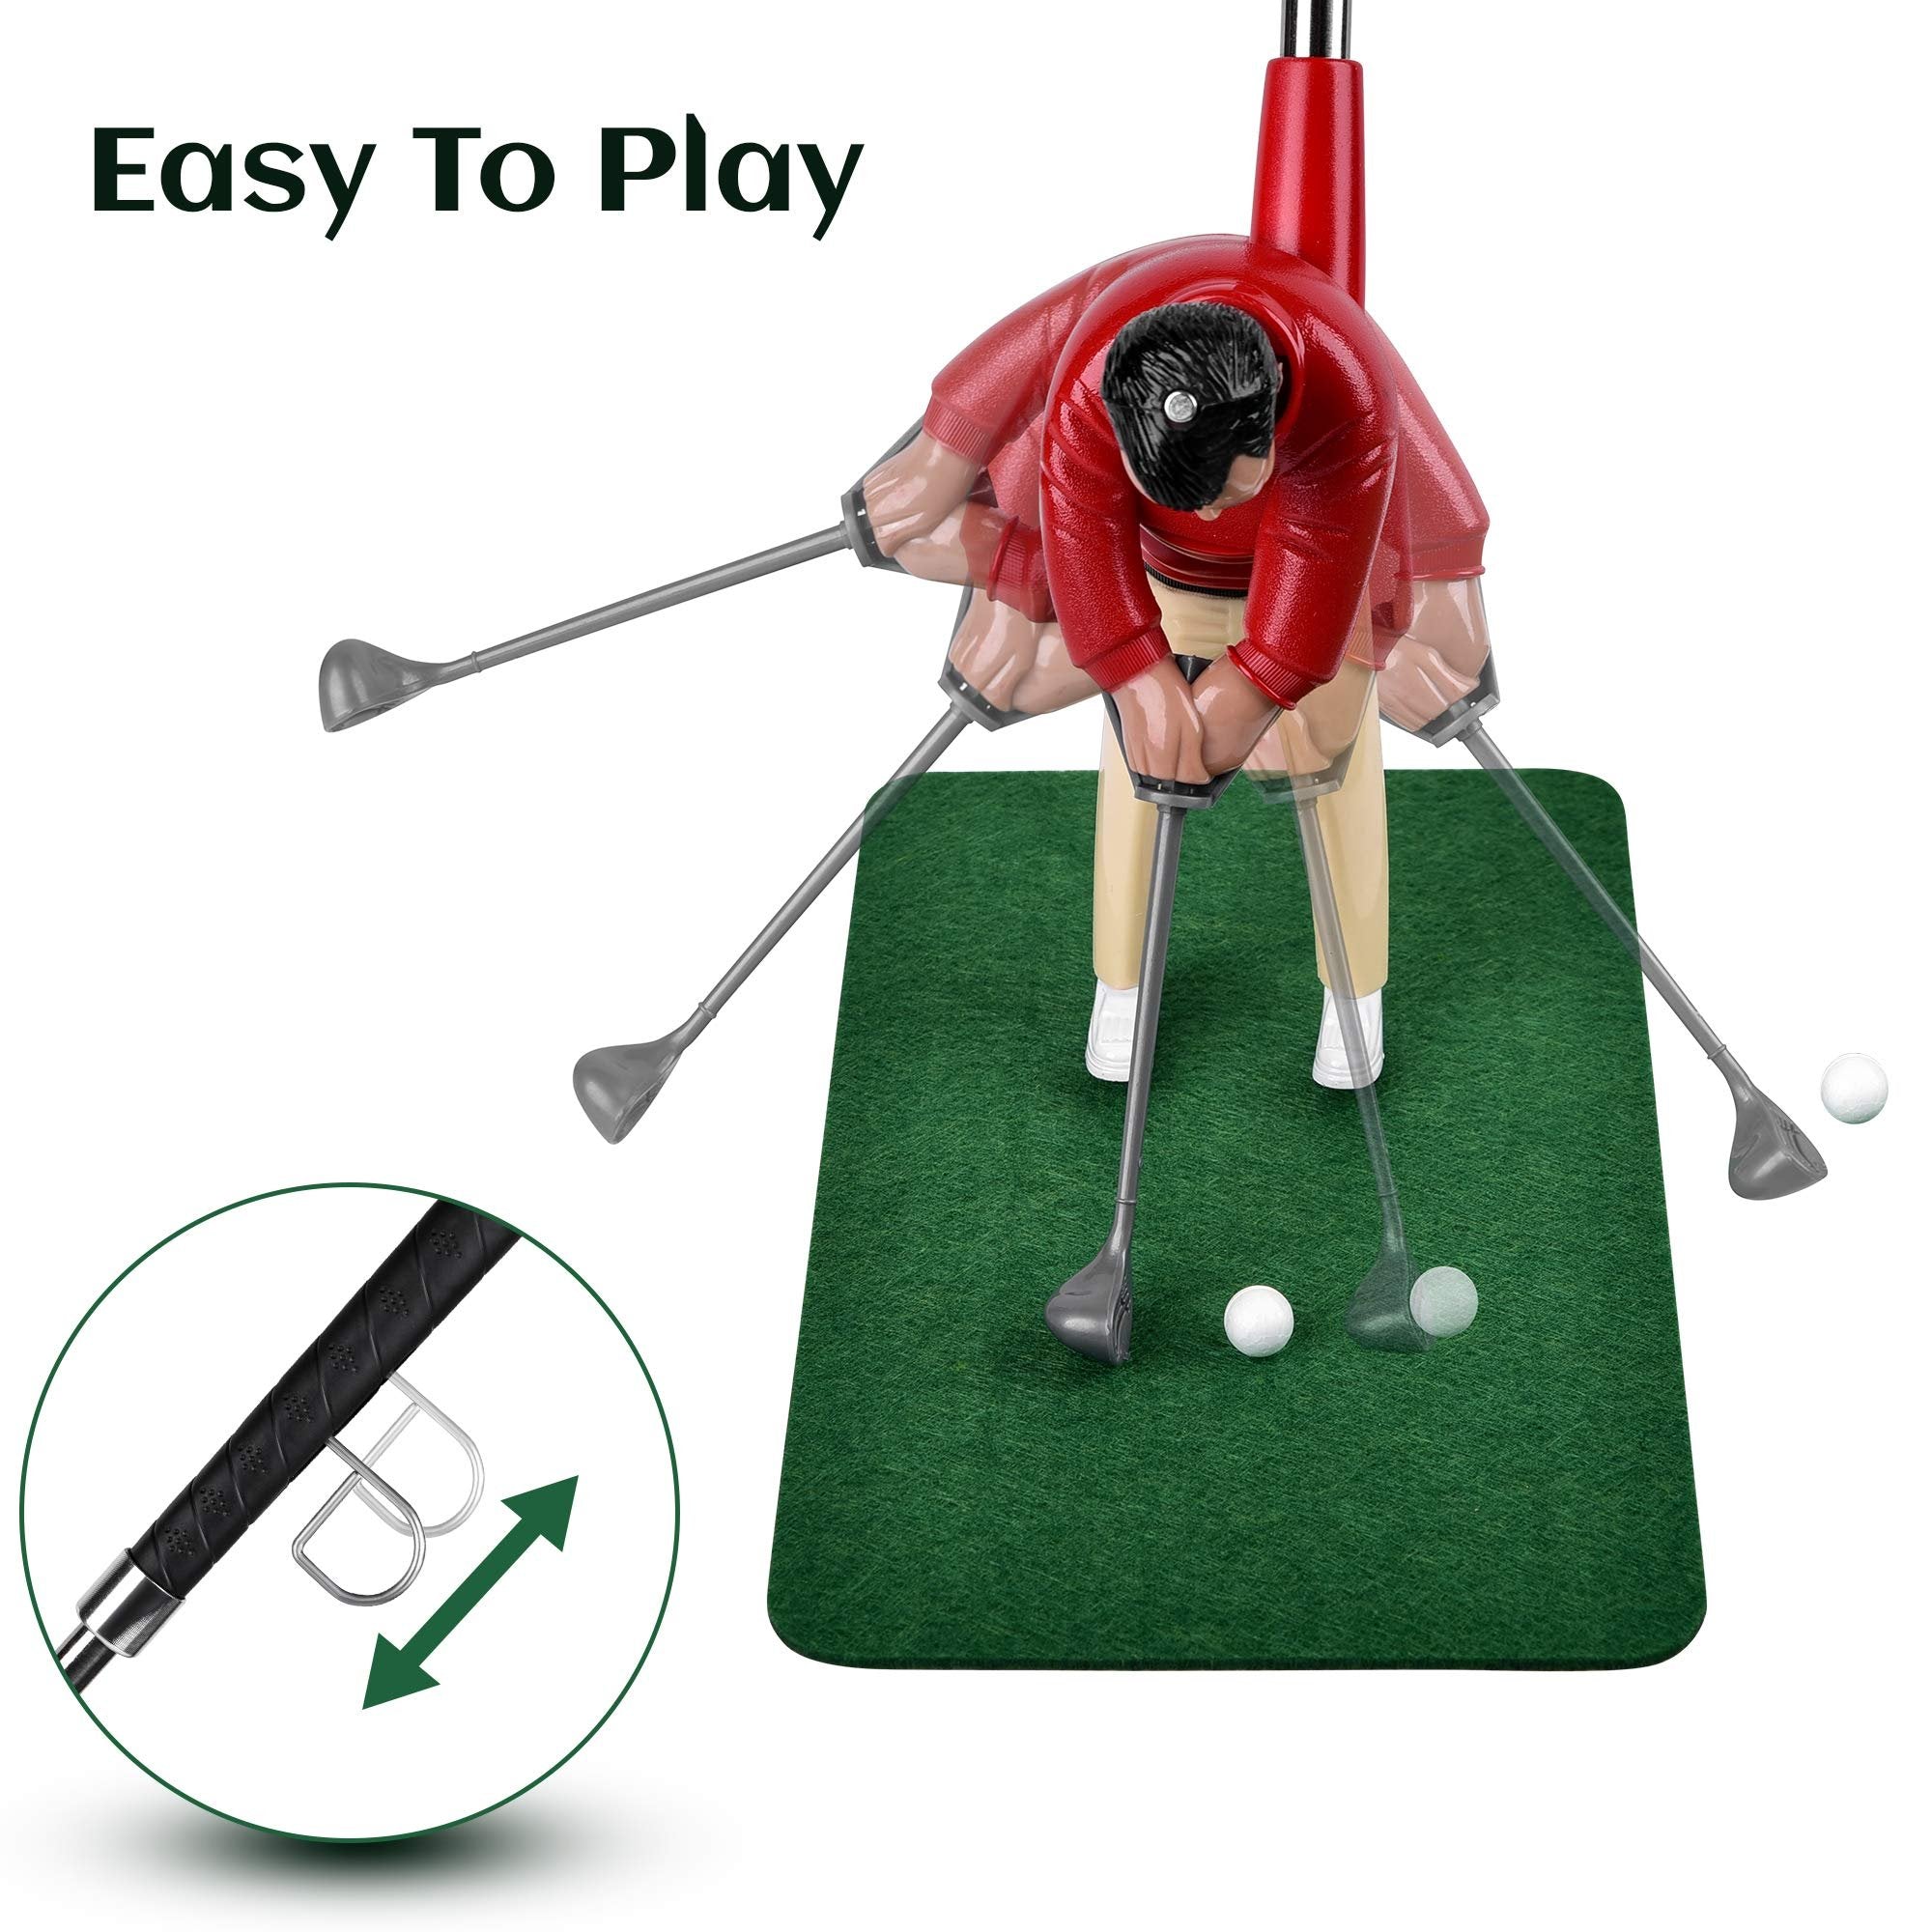 Abco Tech Mini Golfing Man Indoor Golf Kit - Golf Course Backyard Set - Complete Mini Golf for Home - Easy to Set Up and Play - Lightweight & Compact - Portable Mini-Golf Course